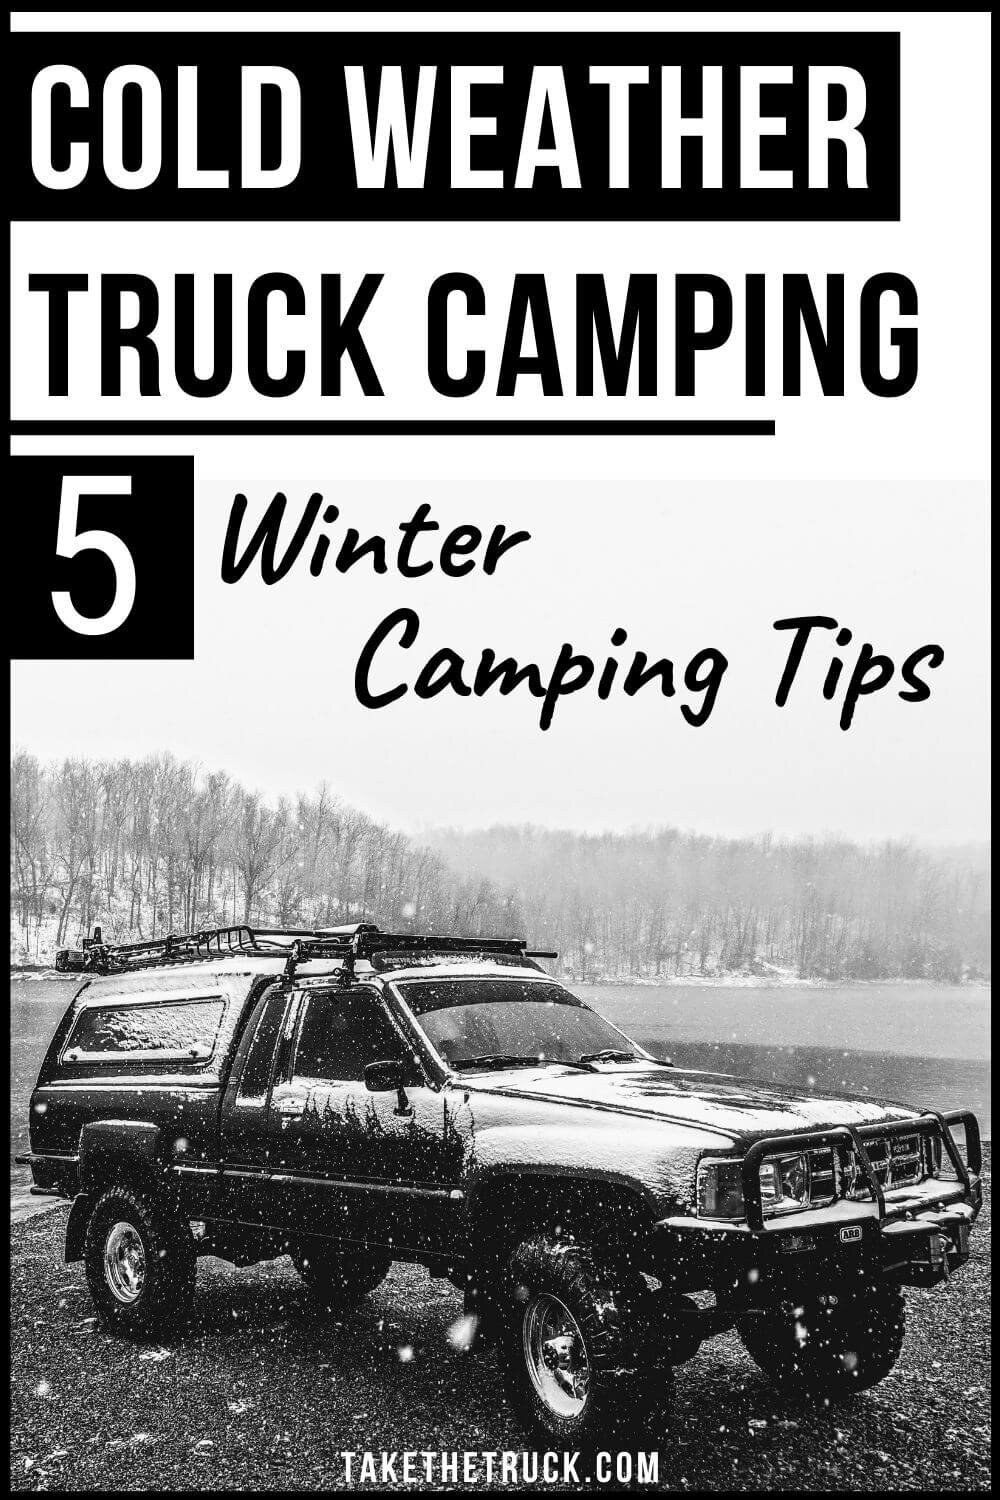 Winter truck camping doesn’t have to be uncomfortable! This post is full of ideas to help you stay warm and comfortable when doing some winter and cold weather truck camping.